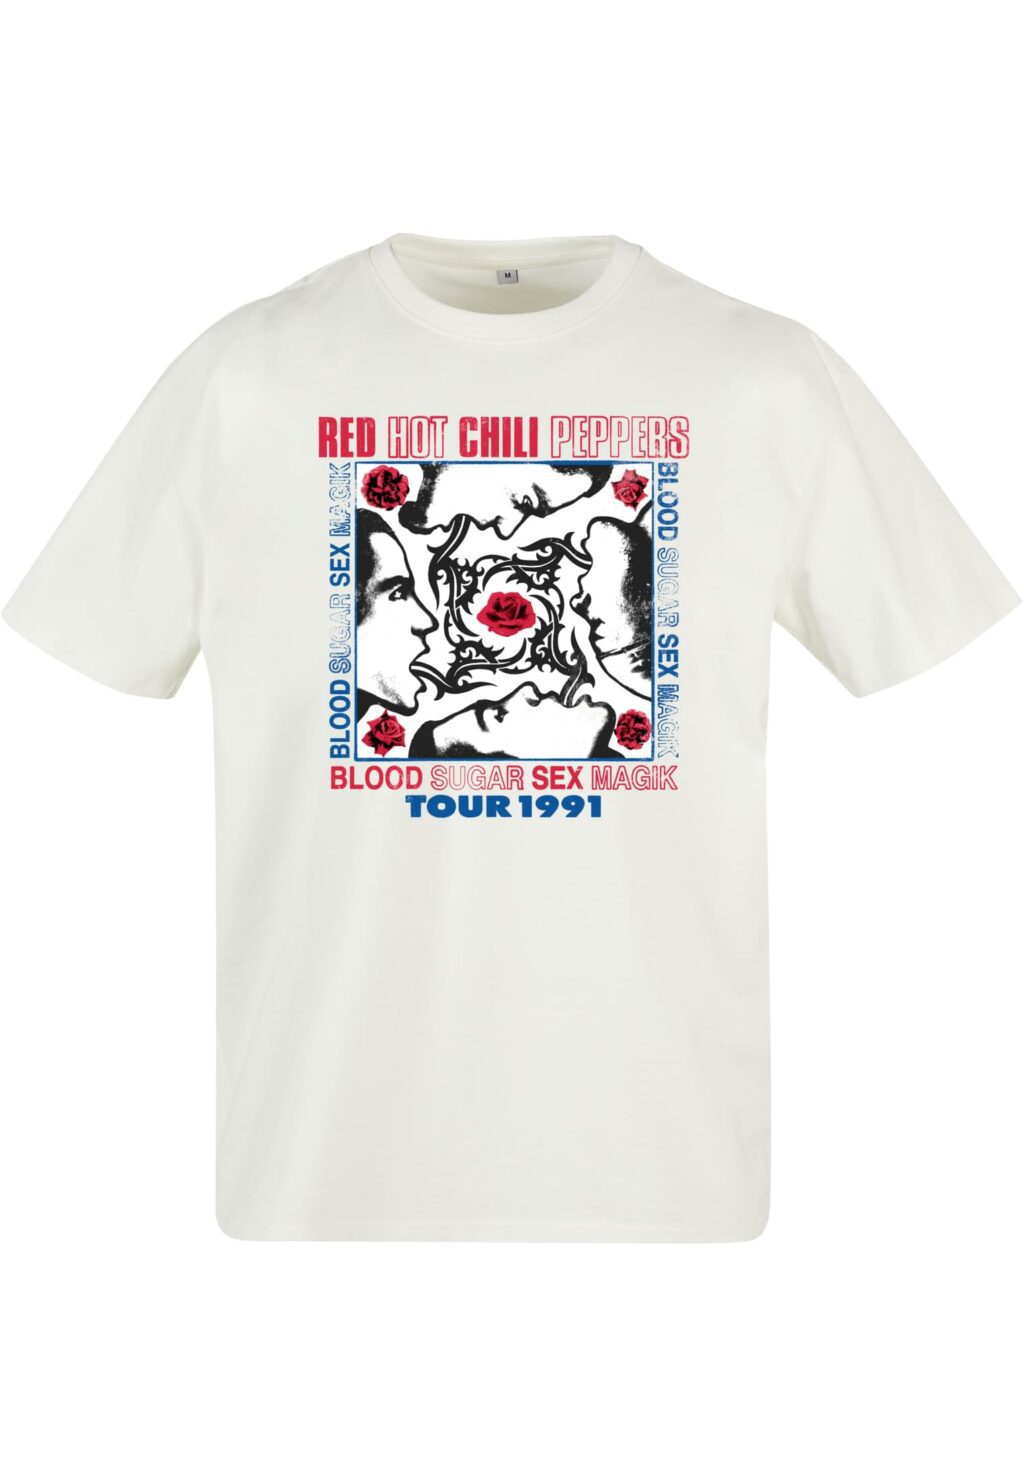 Red Hot Chilli Peppers Oversize Tee ready for dye MT2472